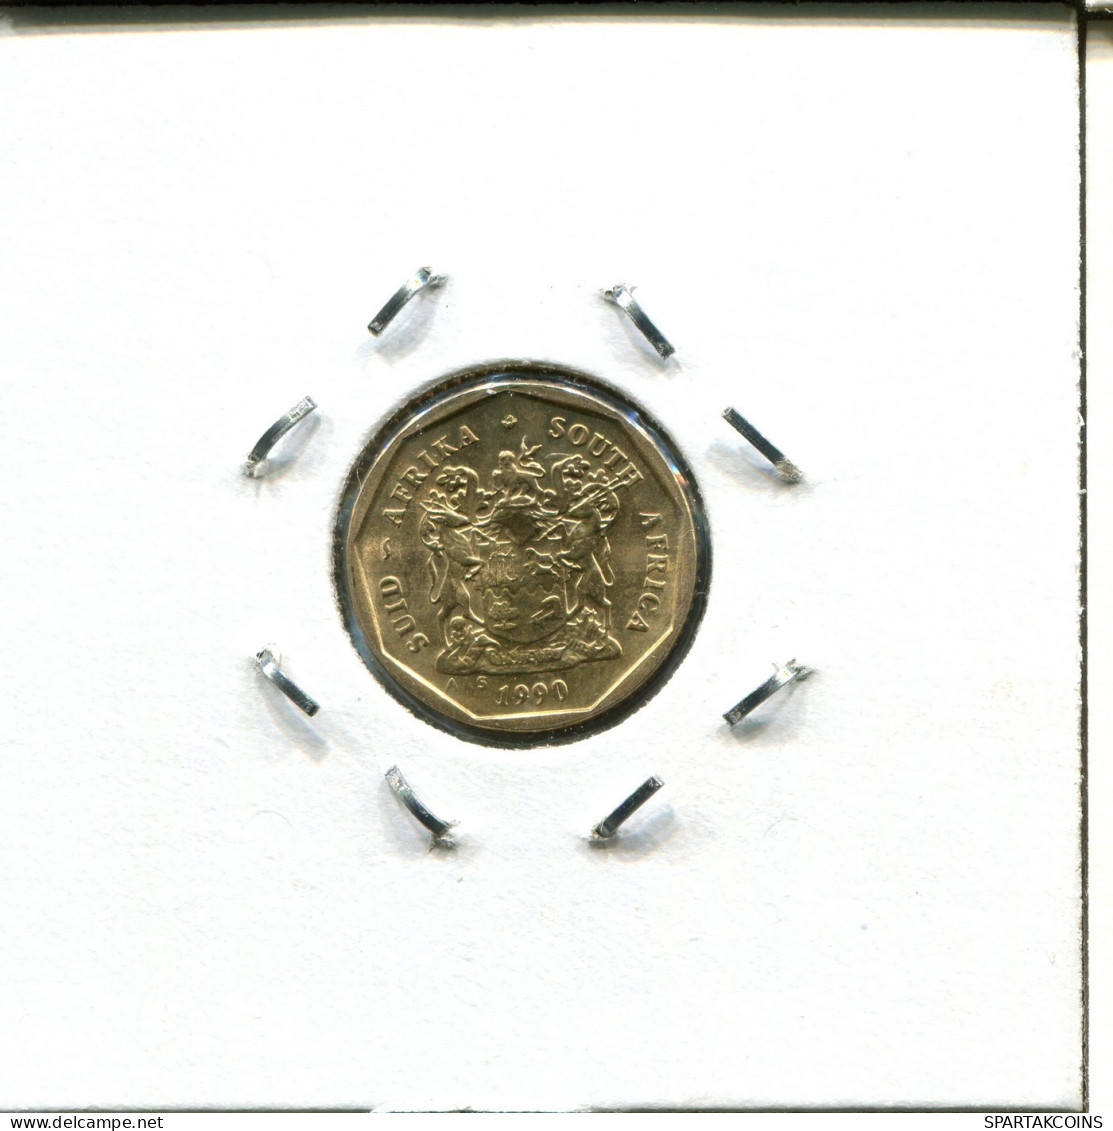 10 CENTS 1990 SOUTH AFRICA Coin #AX219.U.A - South Africa